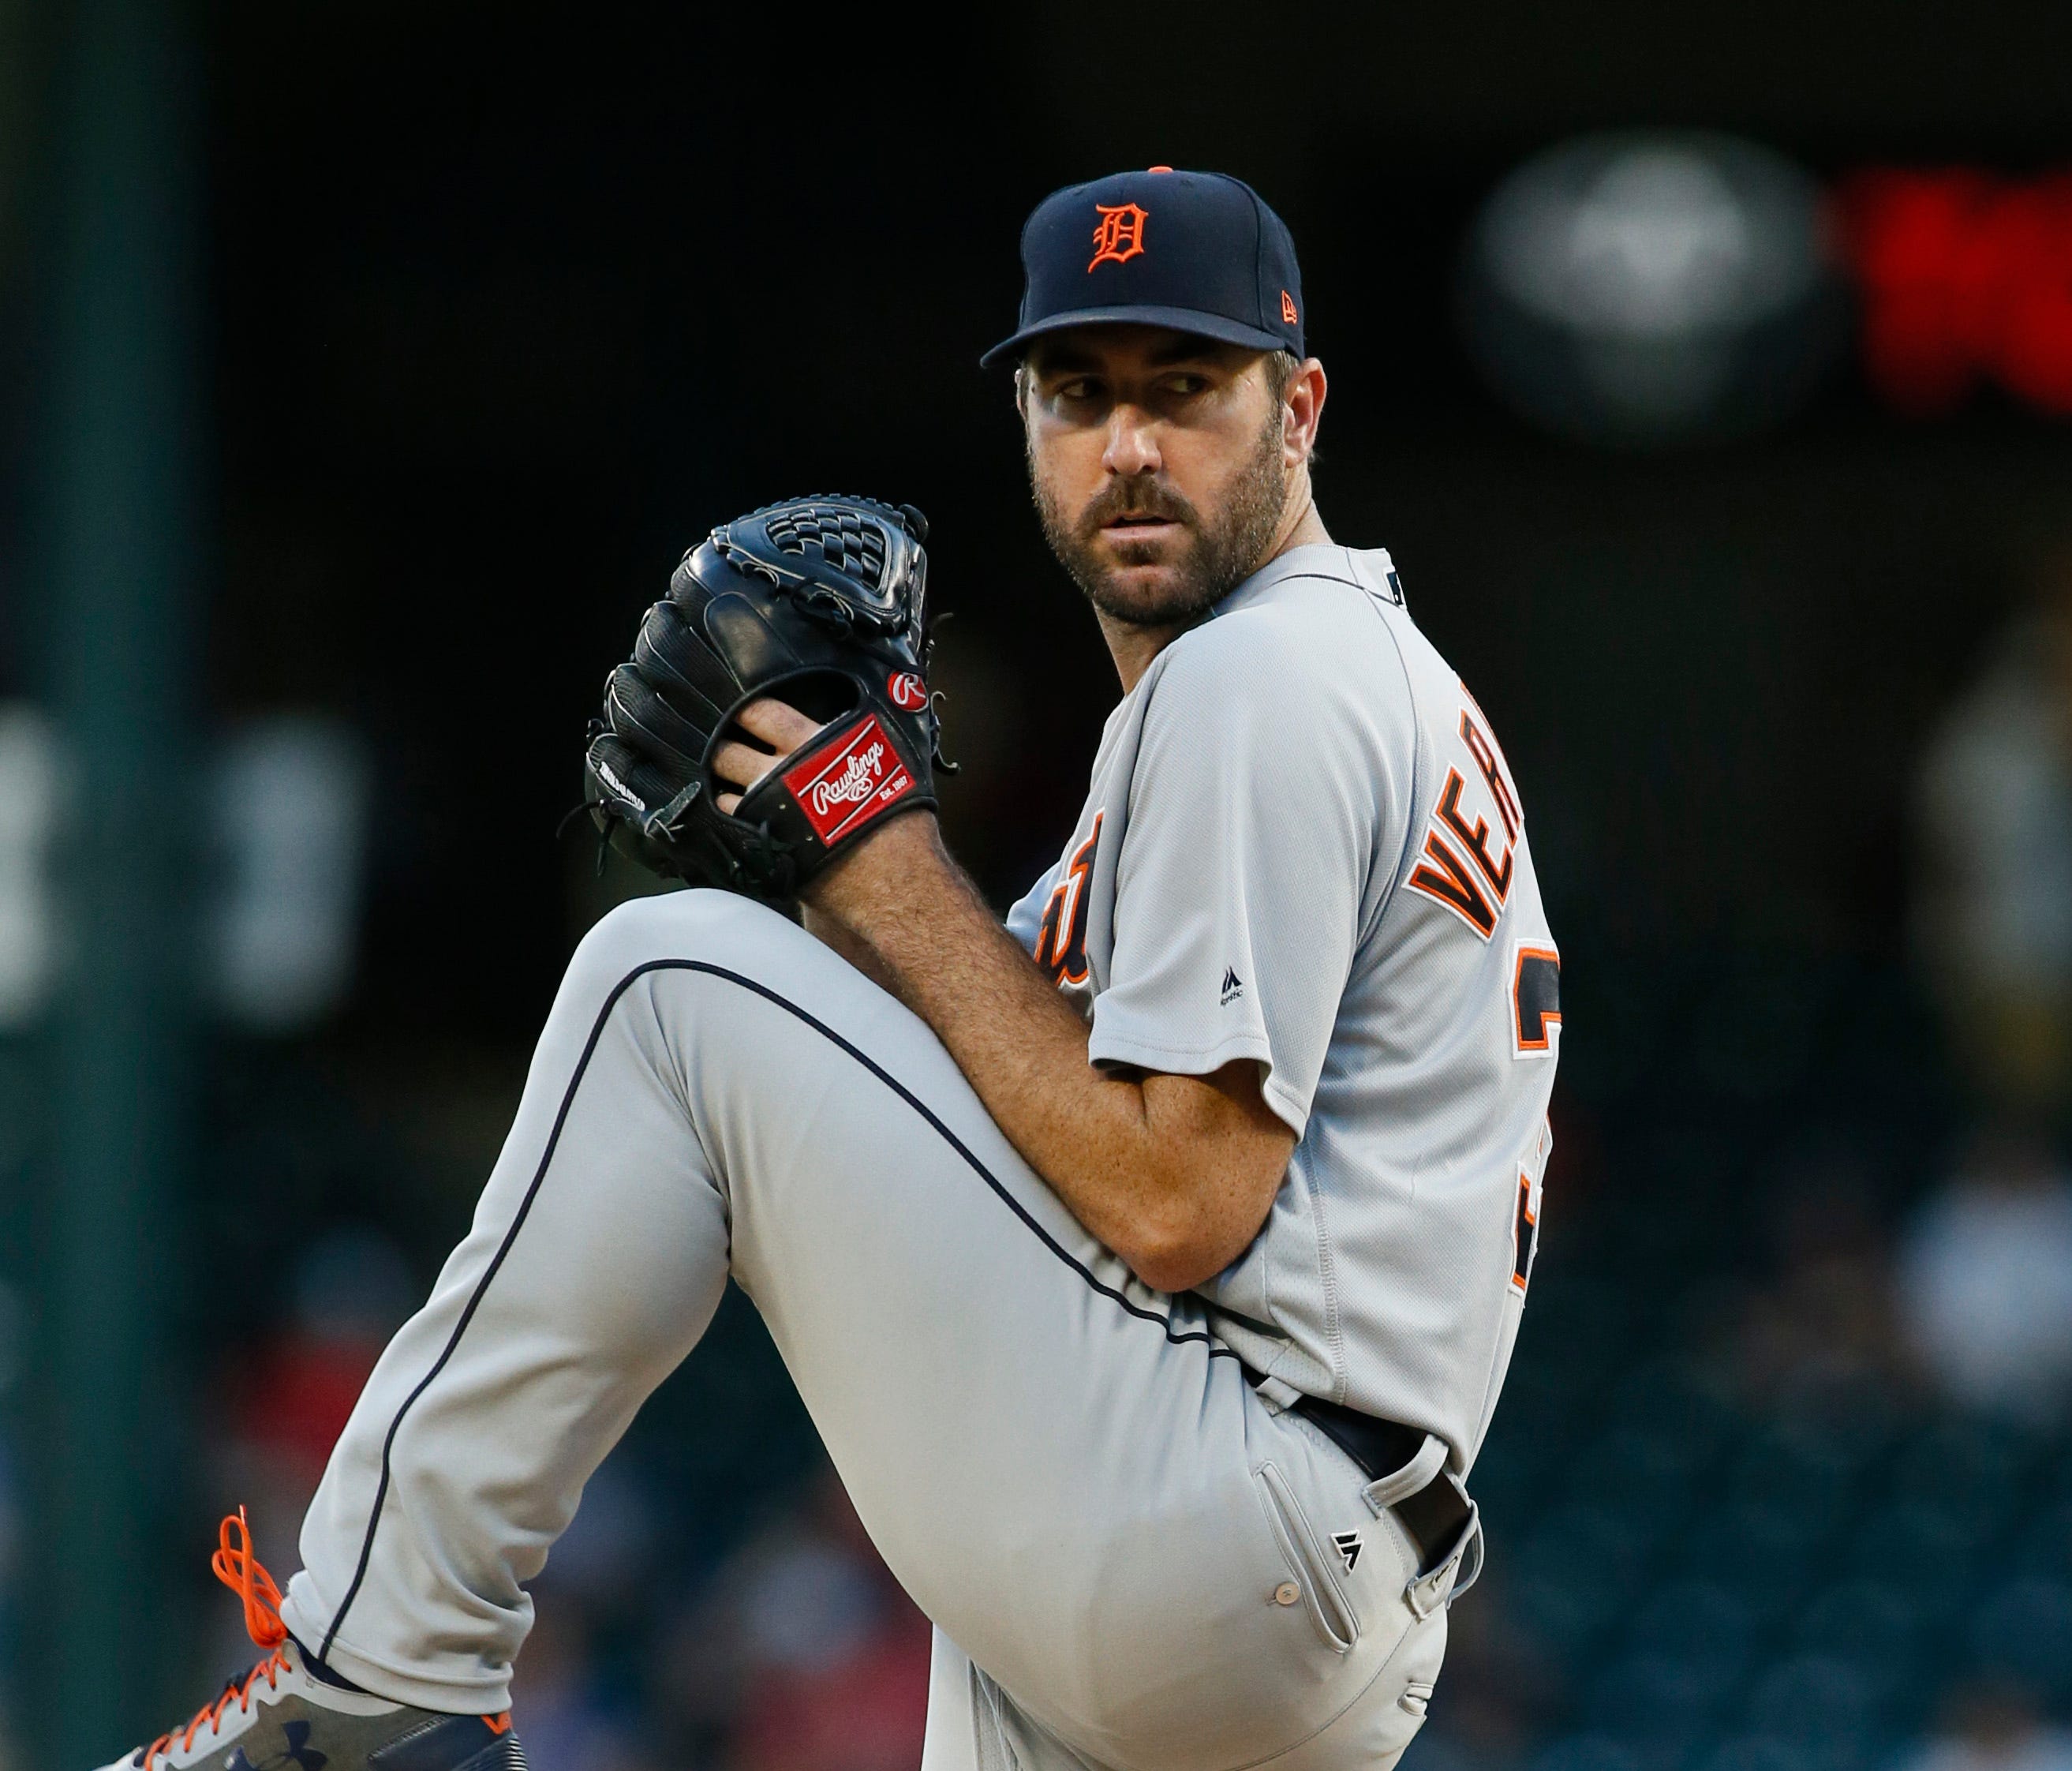 Justin Verlander has spent his entire 13-year career with the Tigers.